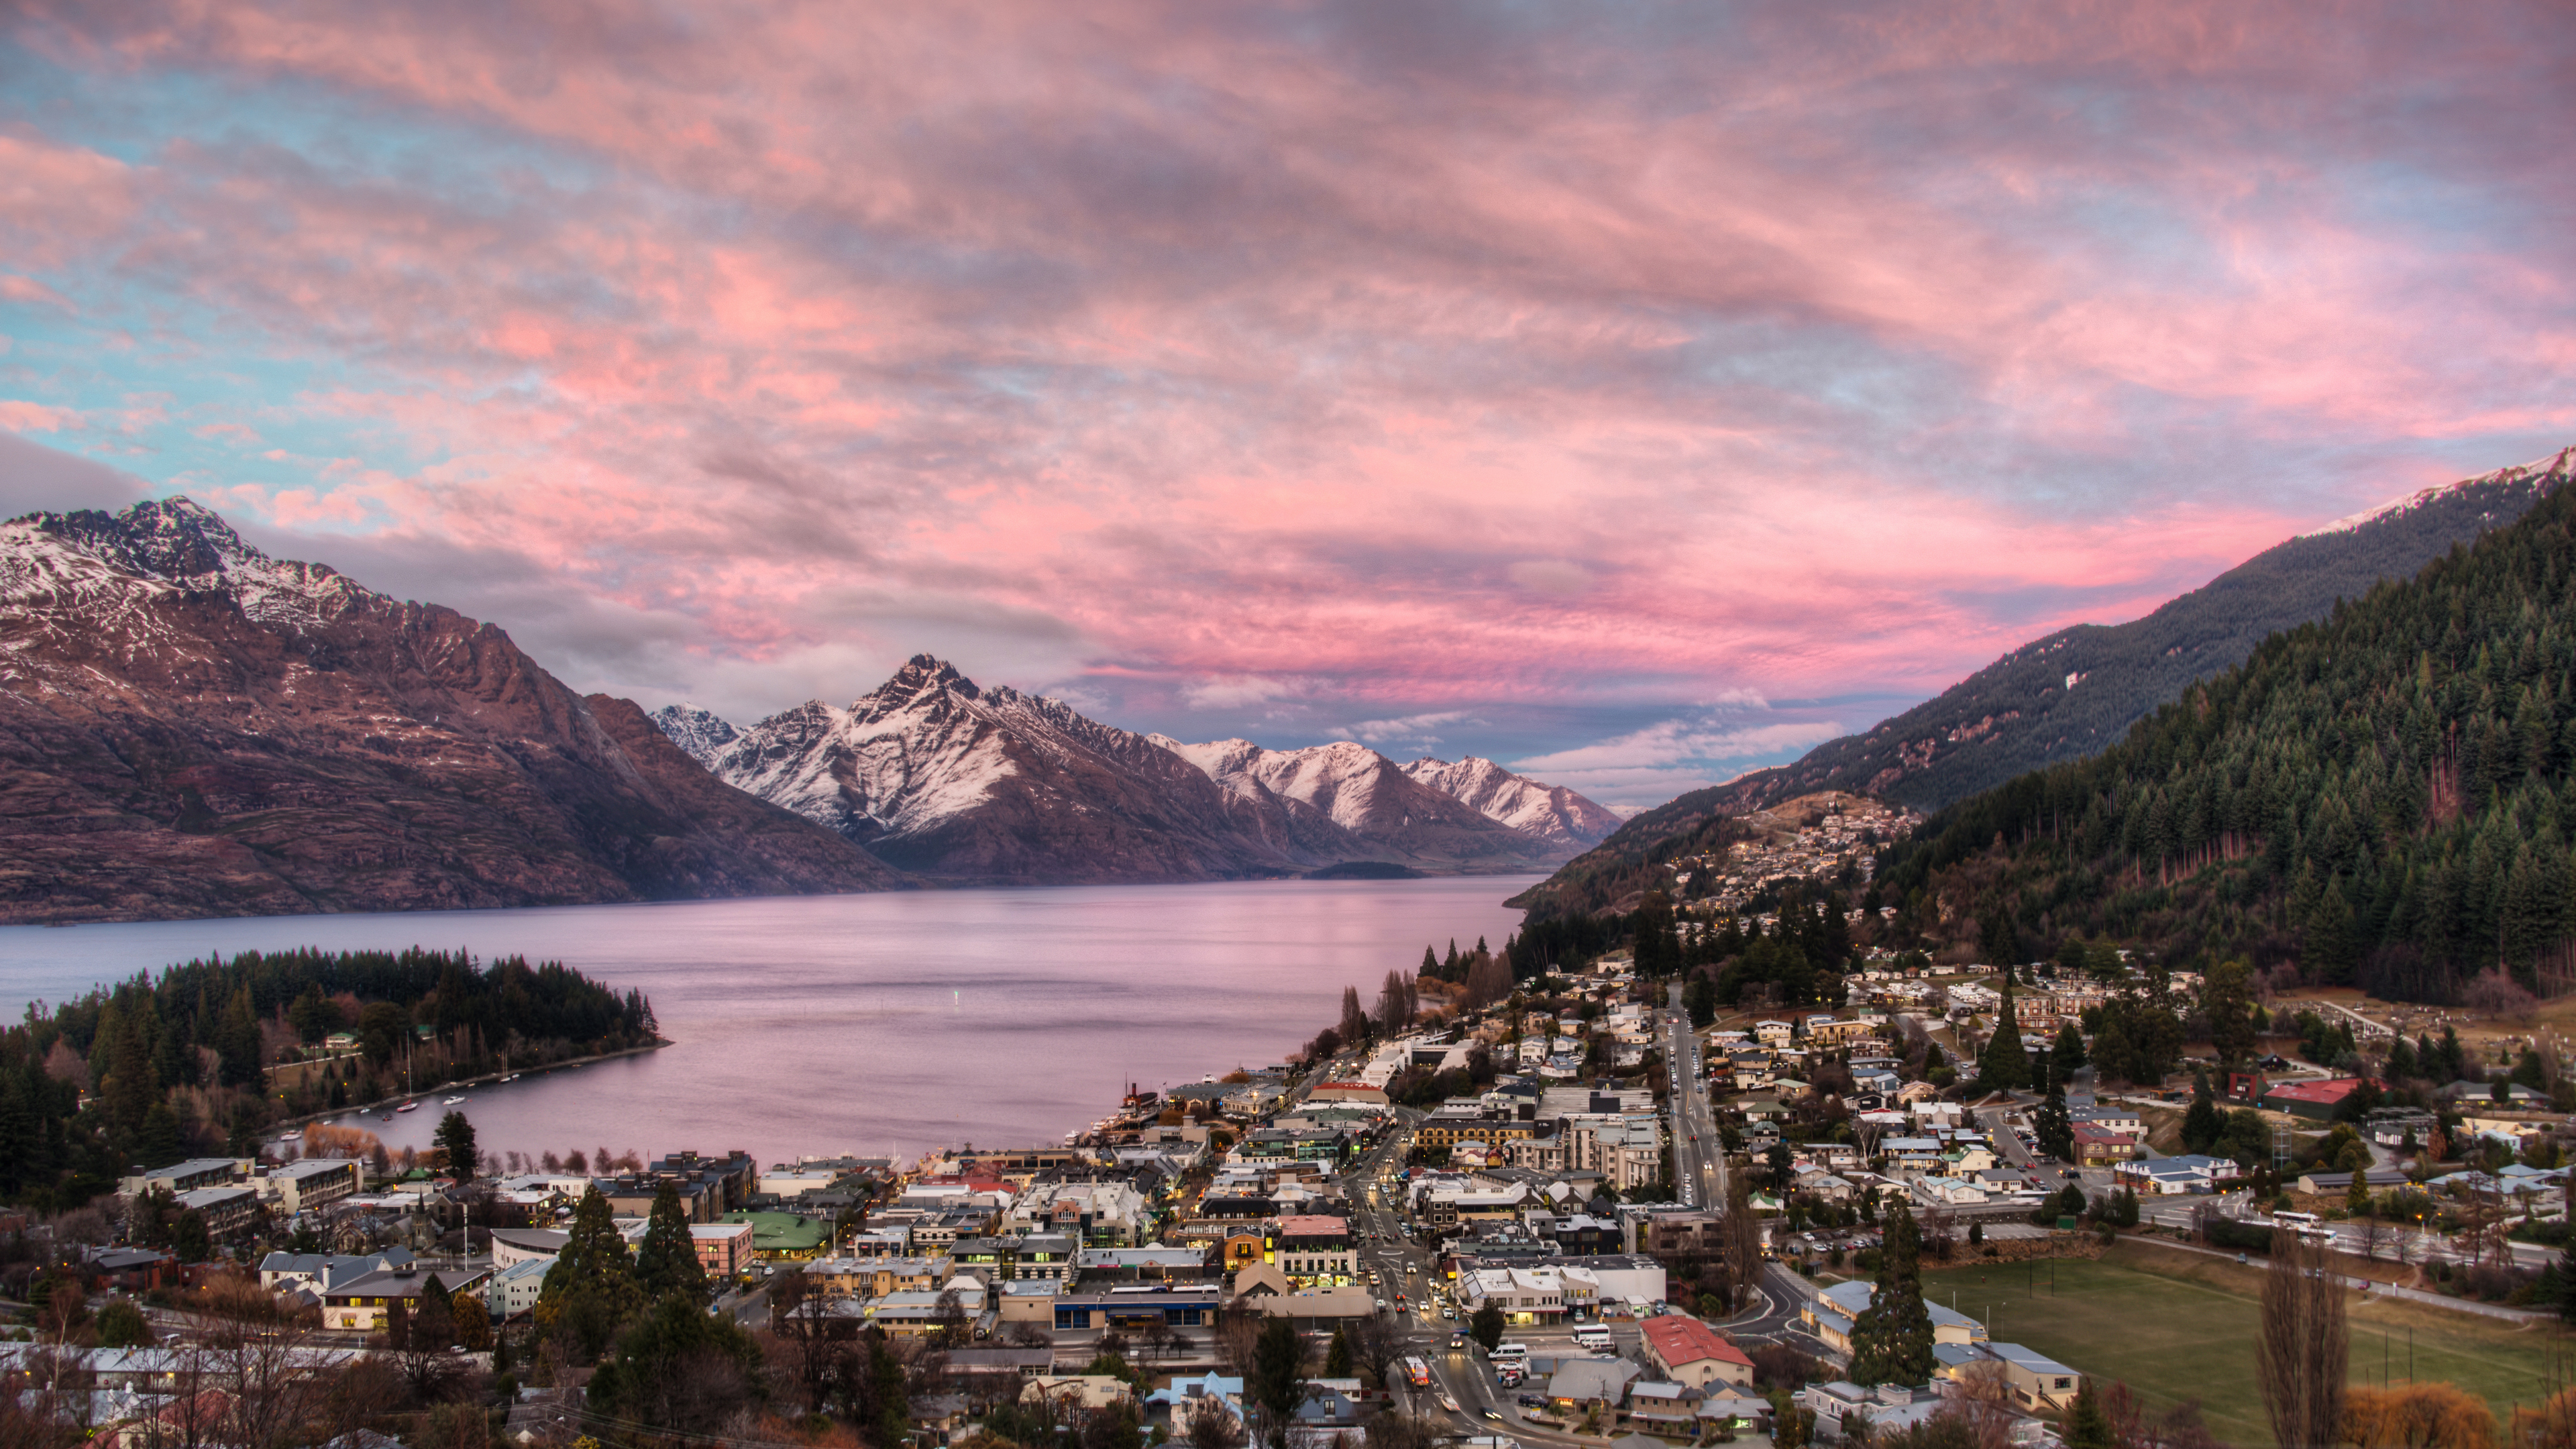 General 3840x2160 landscape 4K Queenstown New Zealand city mountains snow clouds sky sunset glow